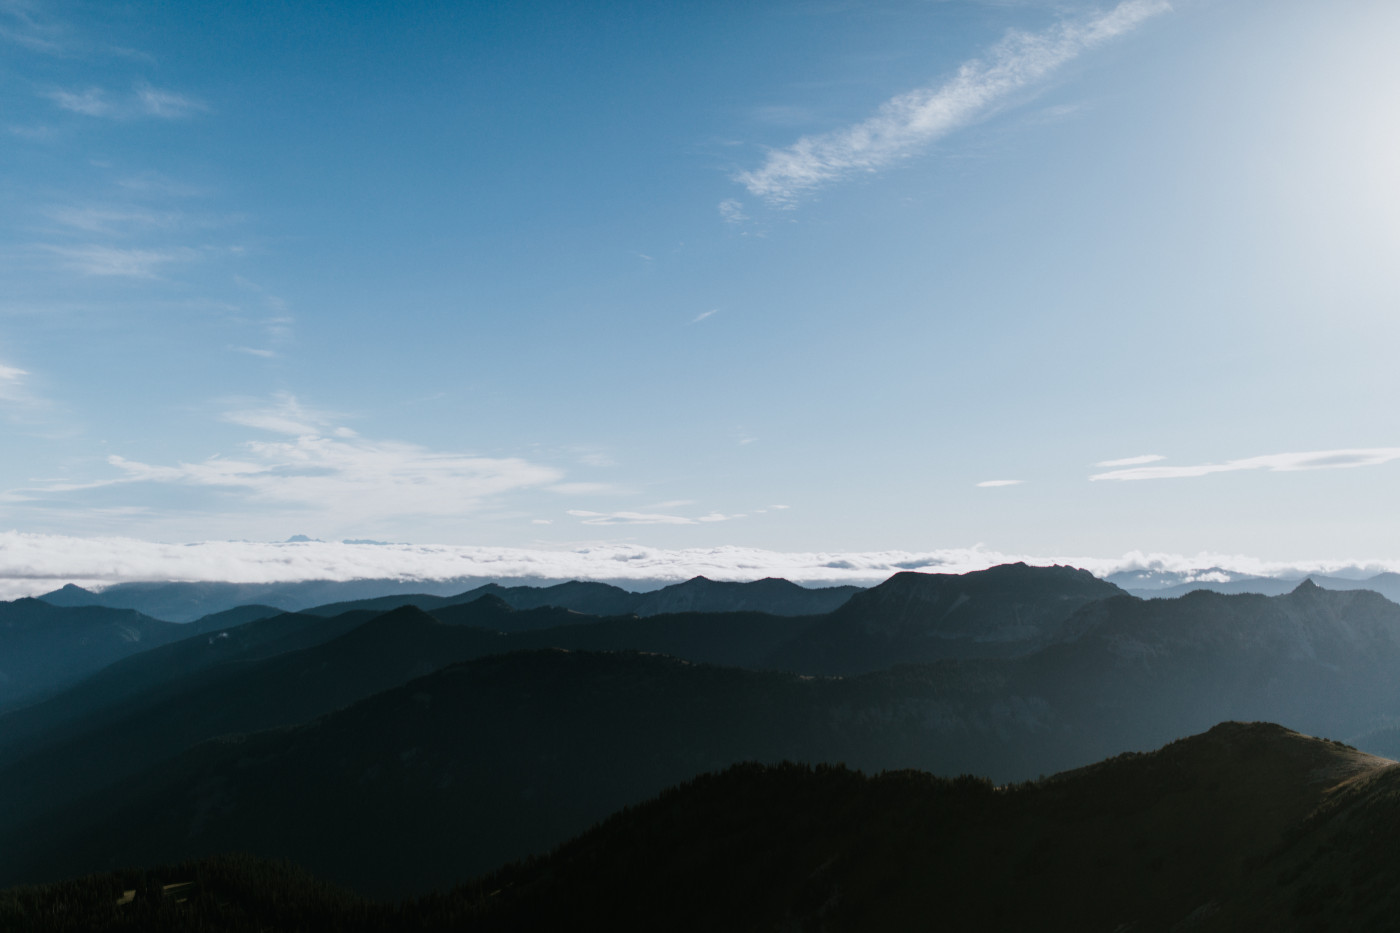 A view of the mountains. Elopement photography at Mount Rainier by Sienna Plus Josh.